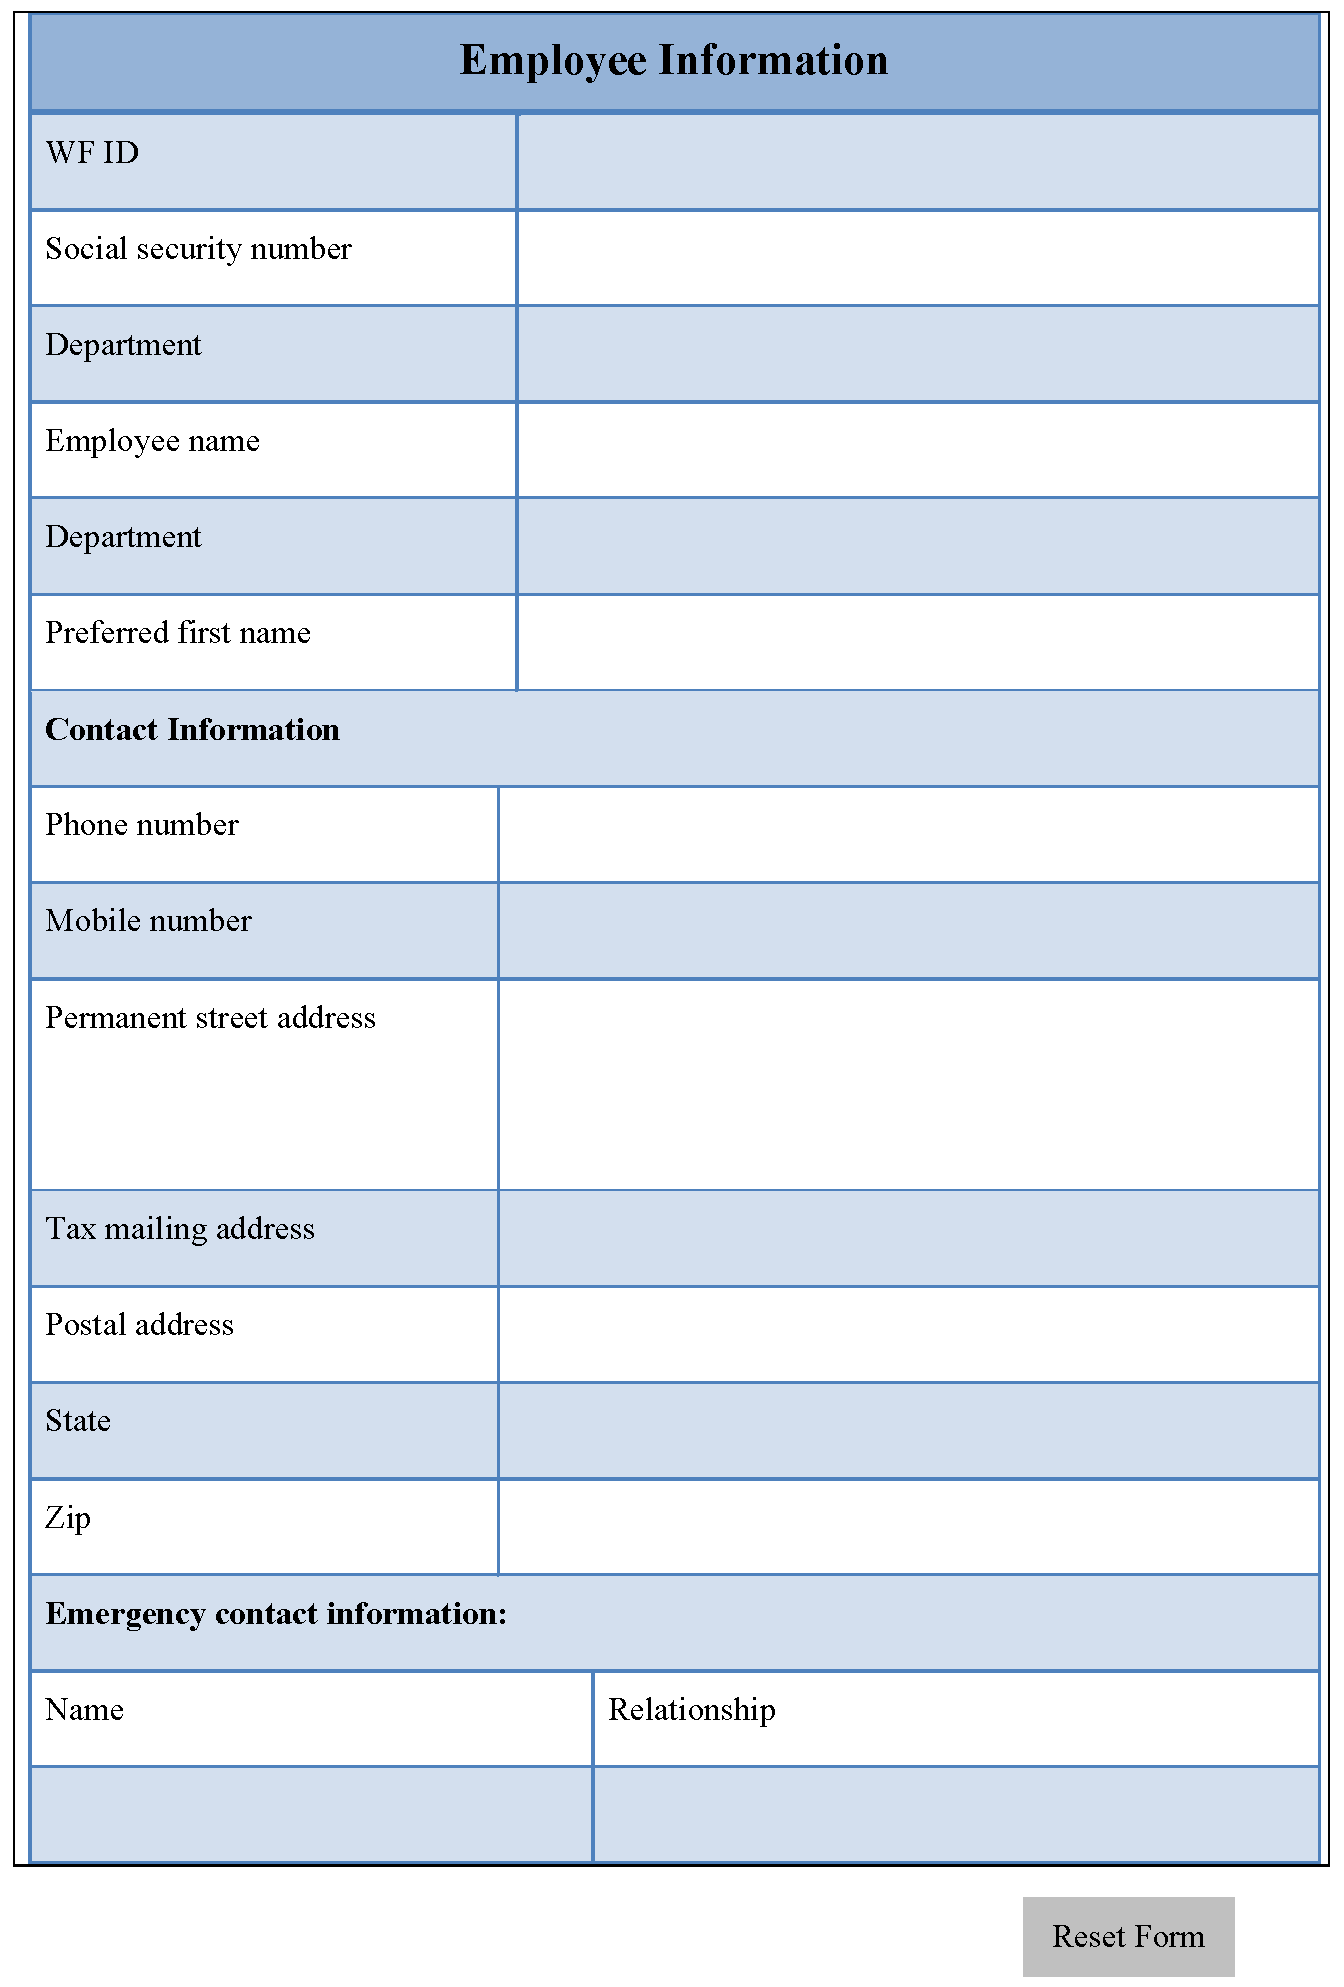 Employee Information Form Template Free Download